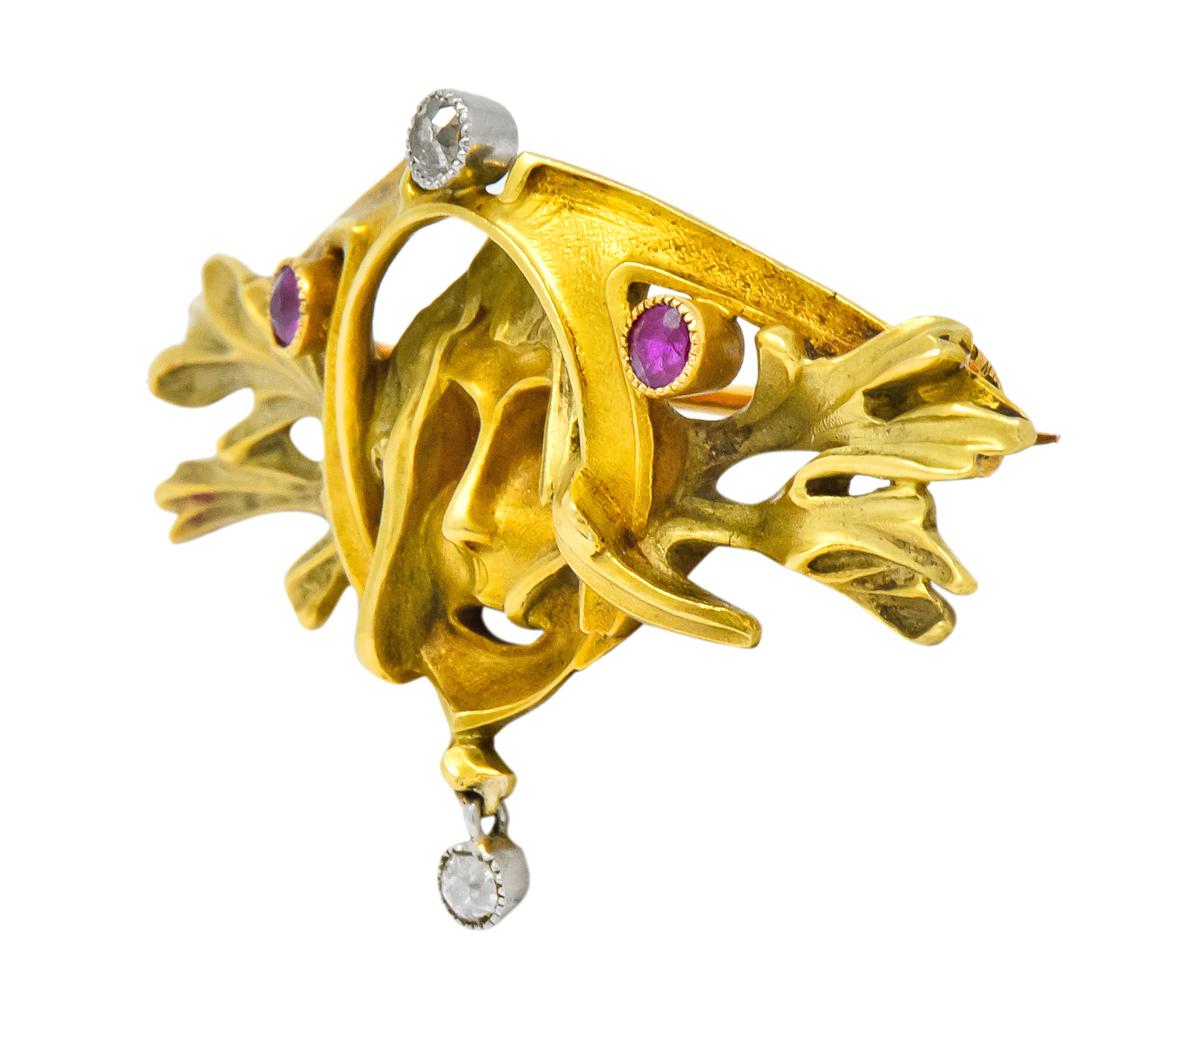 Brooch designed as green man with pierced out features and yellow gold surround

Flanked by detailed green gold foliate and bezel set round rubies weighing approximately 0.17 carat total, semi-transparent and violetish-red in color

With bezel set